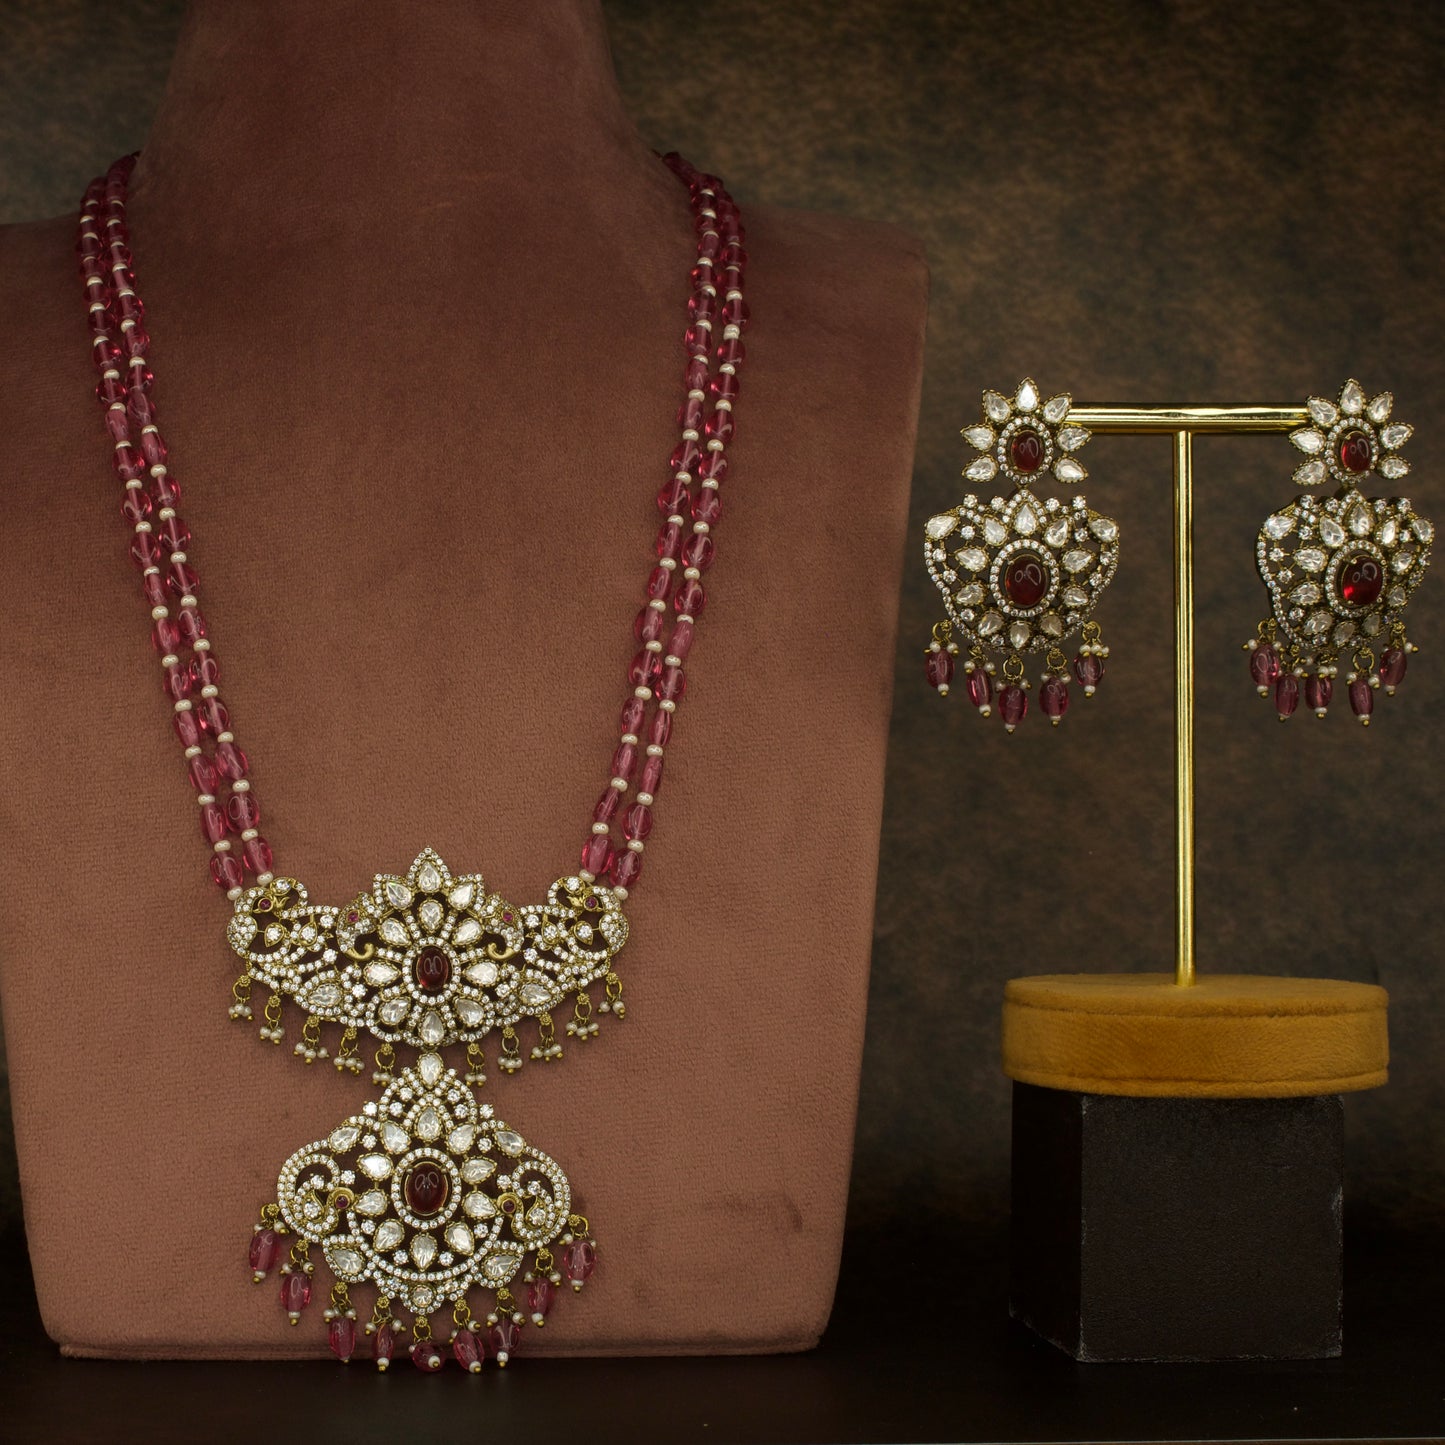 Victorian Rani Haar Necklace set with Zircon with High Quality Victorian Finish. This product belongs to Victorian Jewellery category